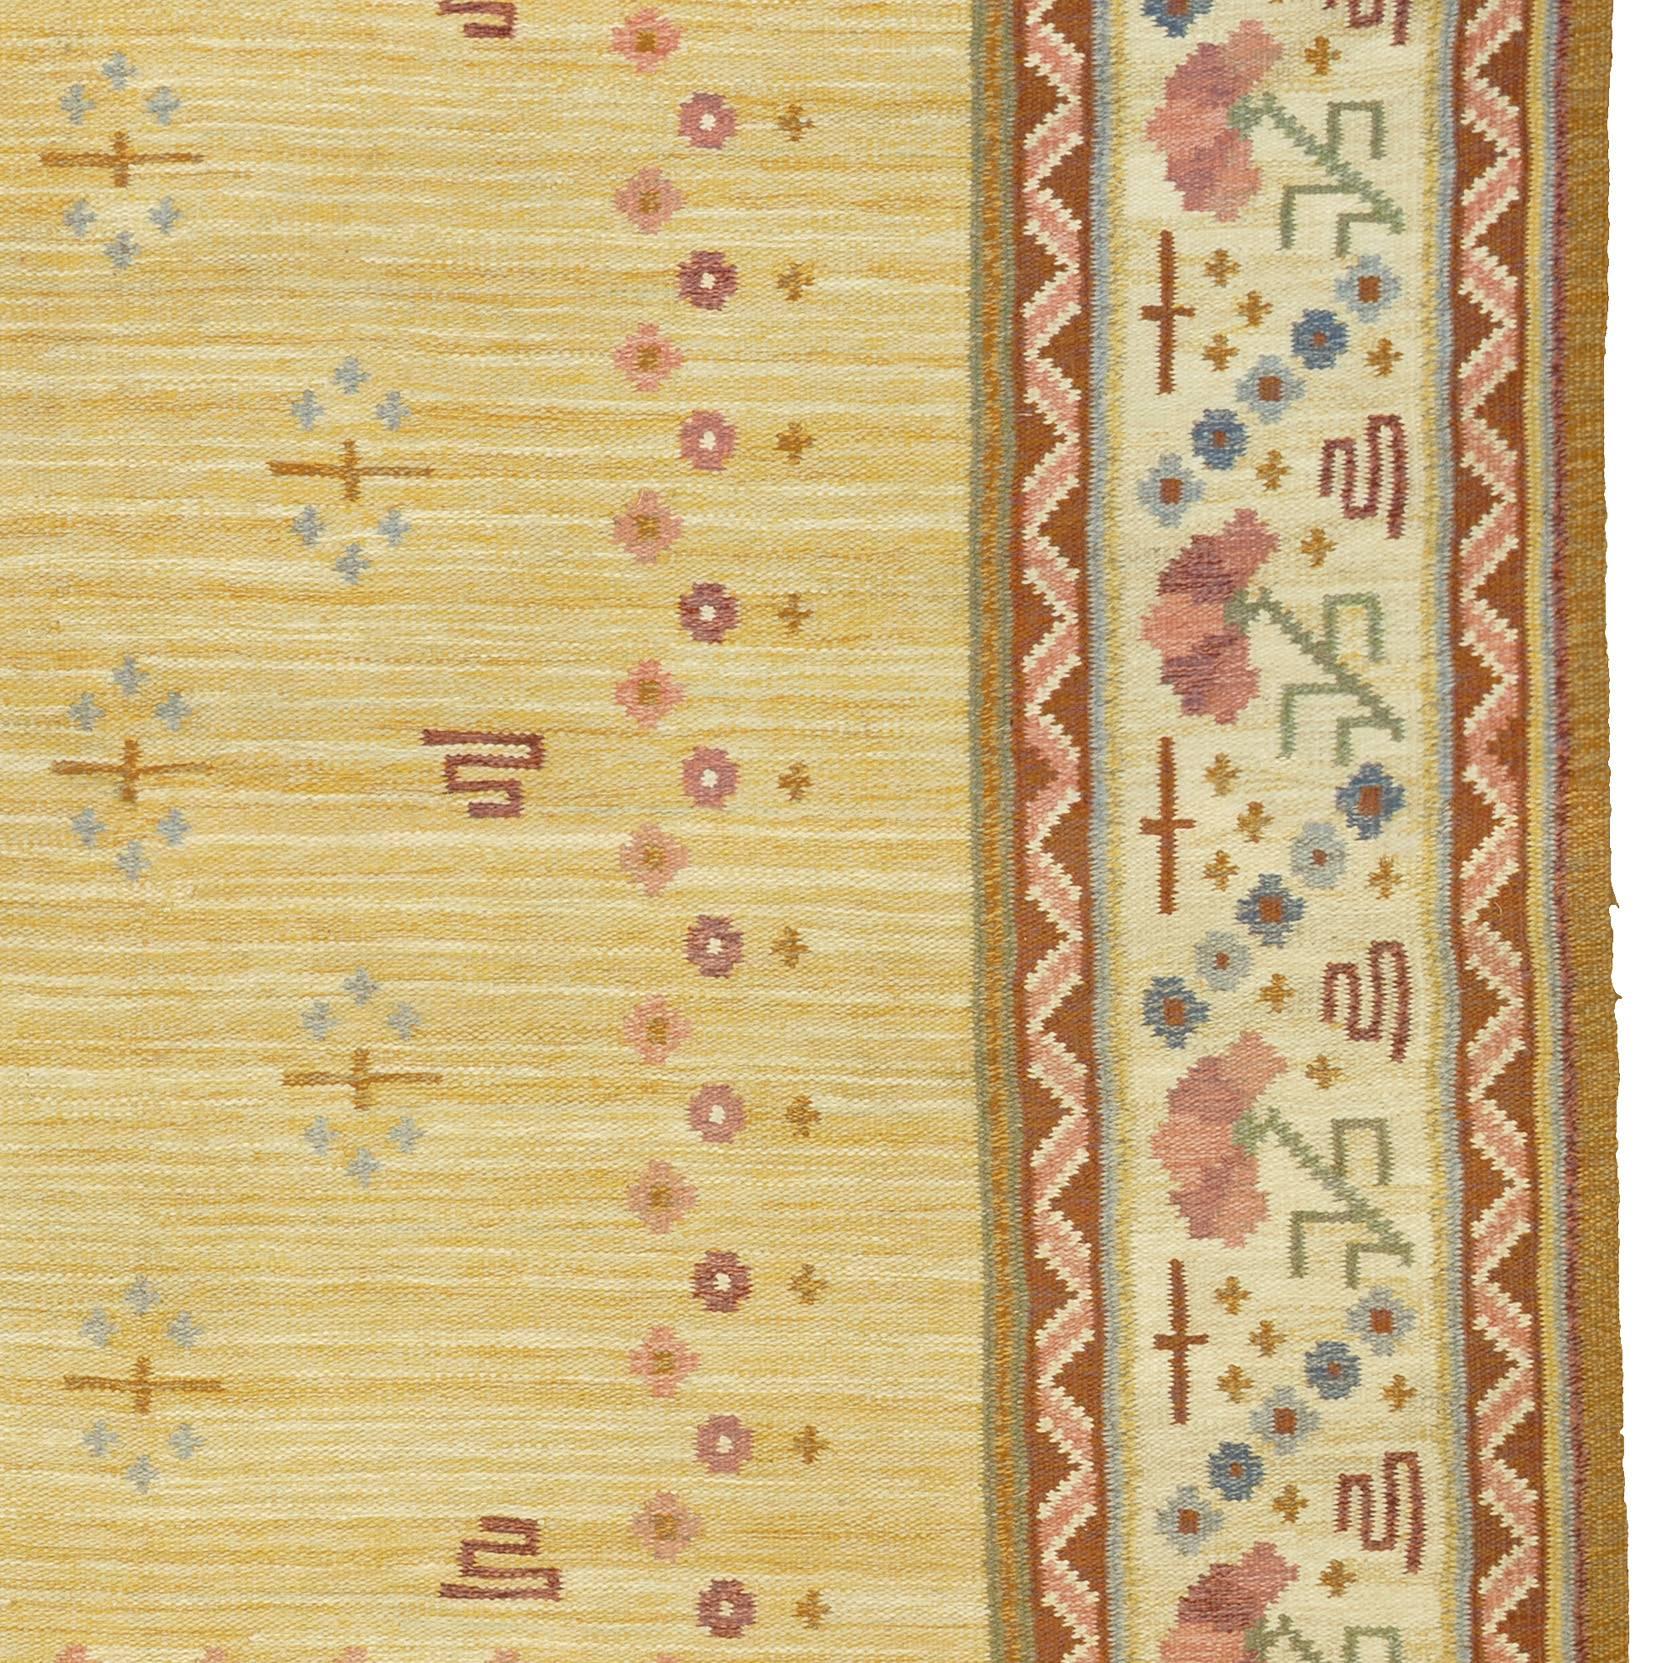 Hand-Woven 20th Century Swedish Flat-Weave Carpet by Solveig Westerberg For Sale